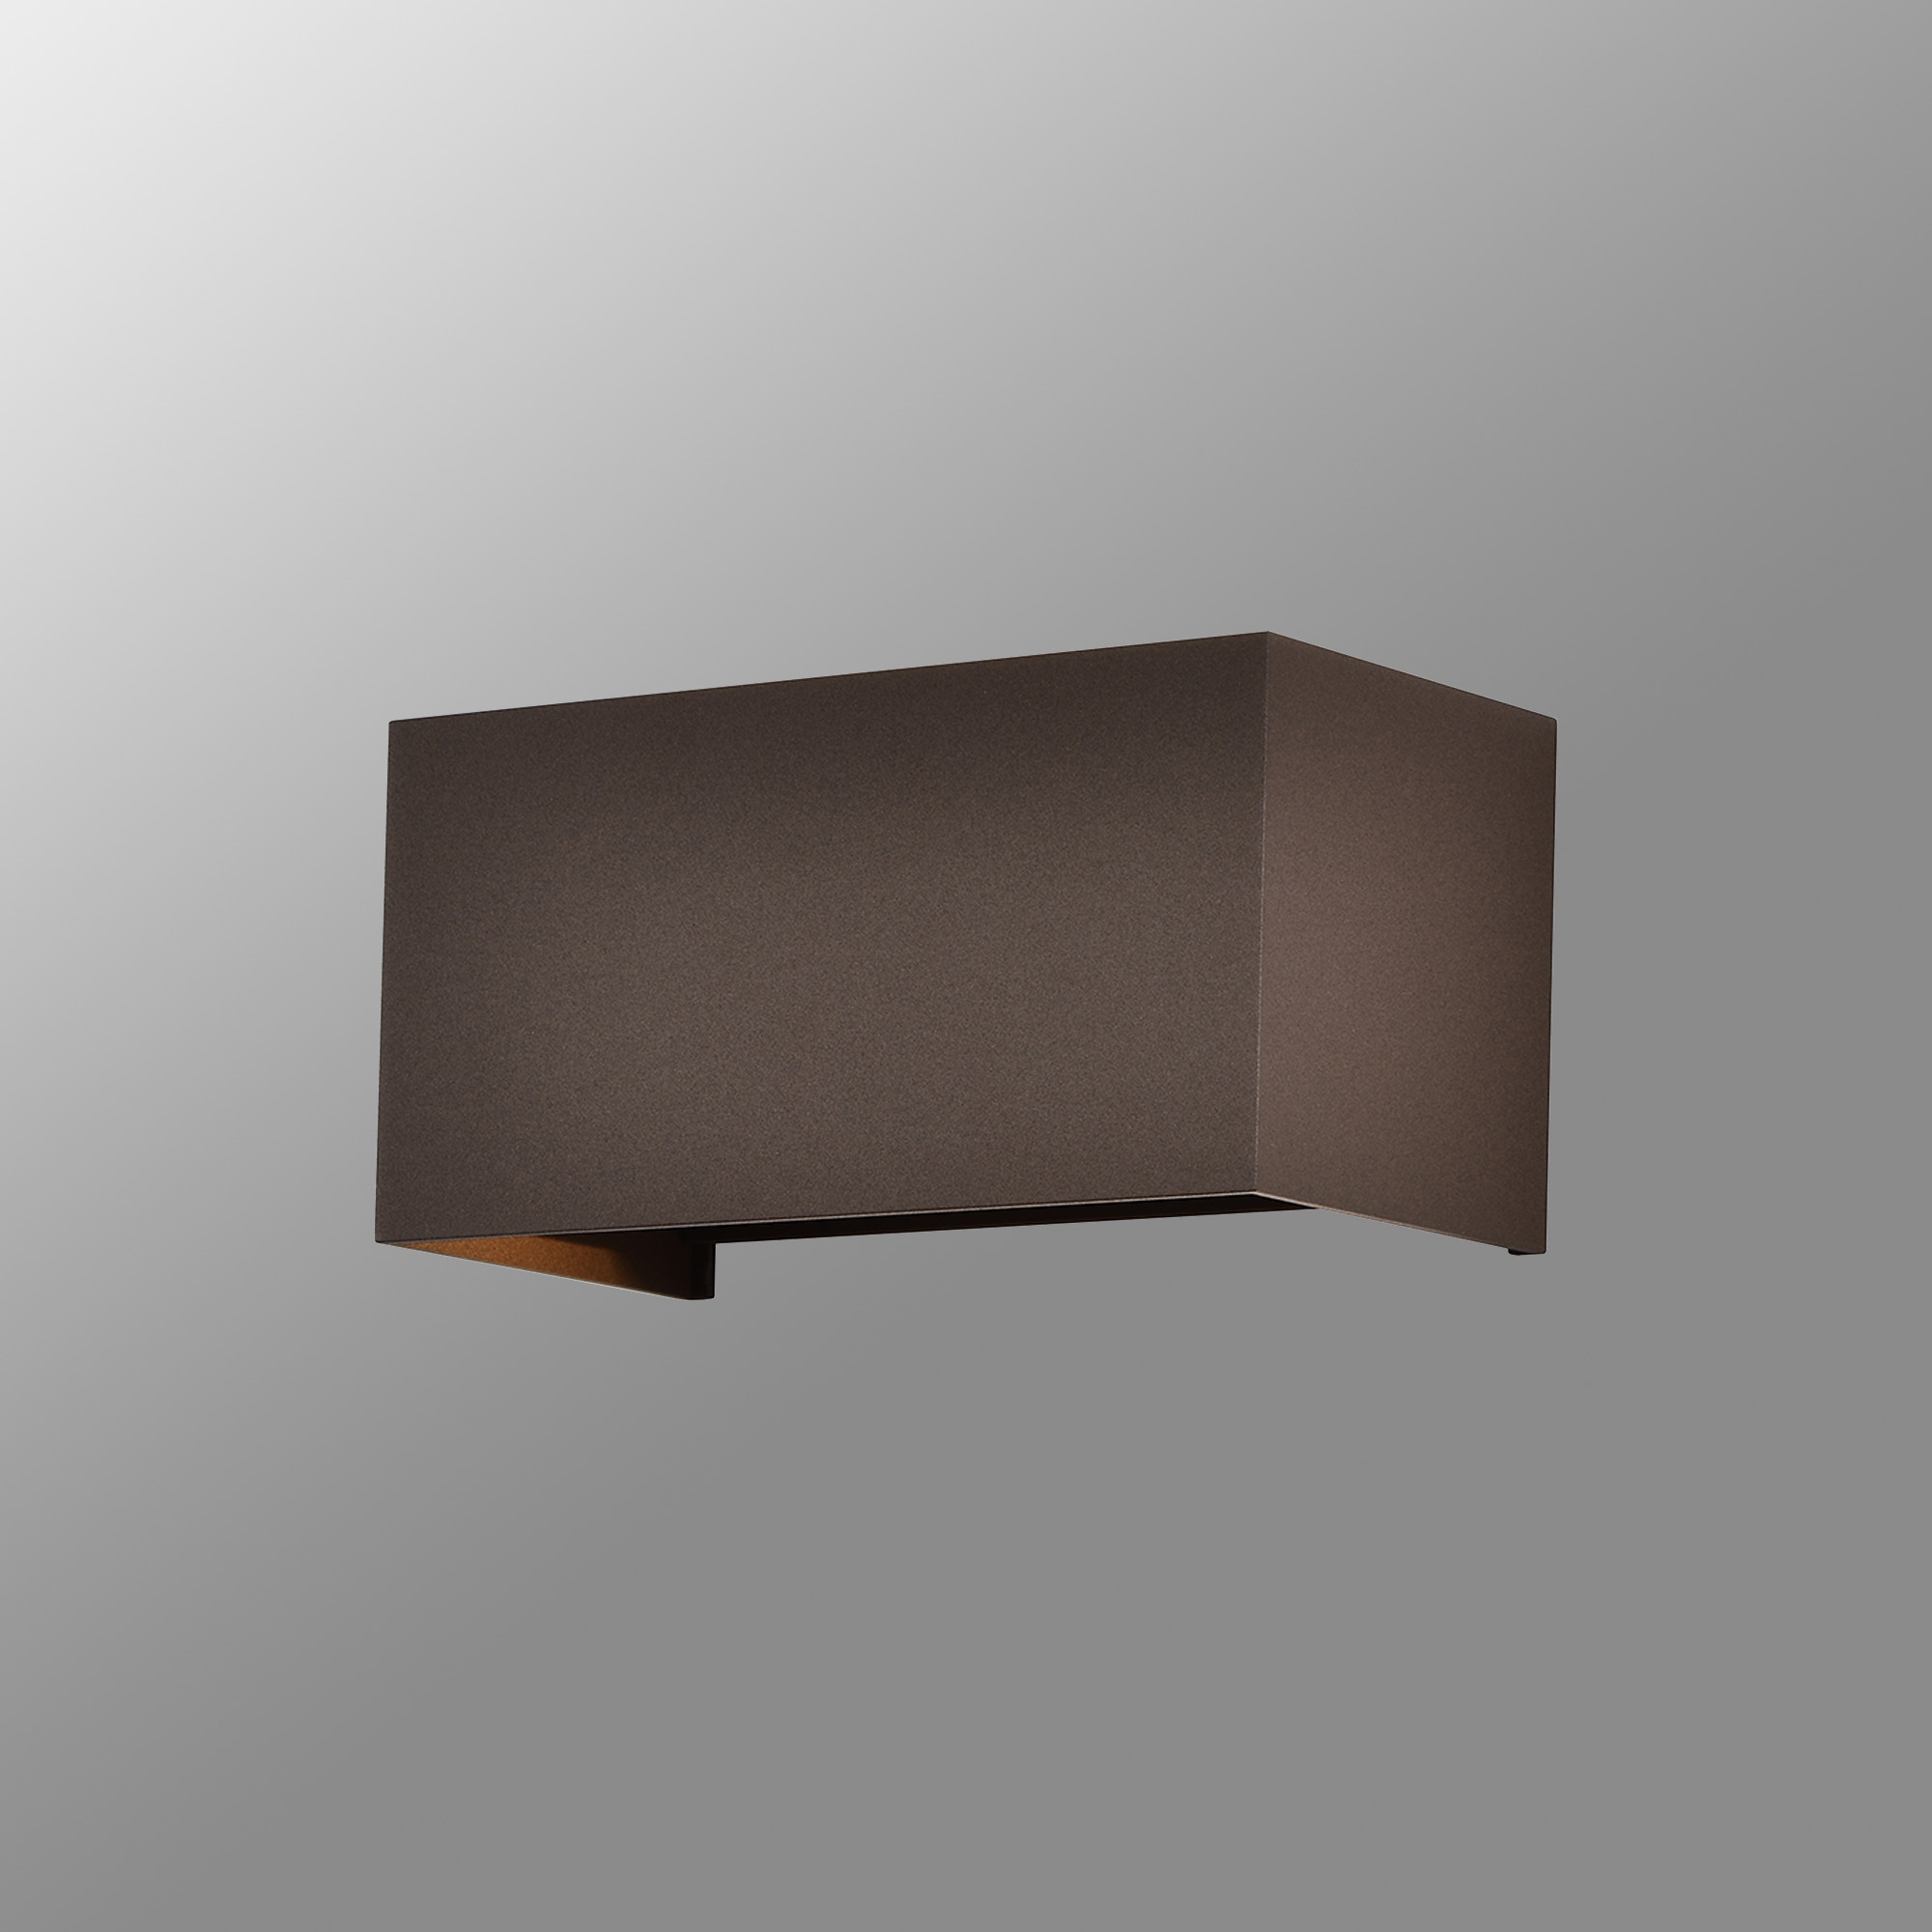 Davos Rust Brown Exterior Lights Mantra Fusion Directional Wall Lights